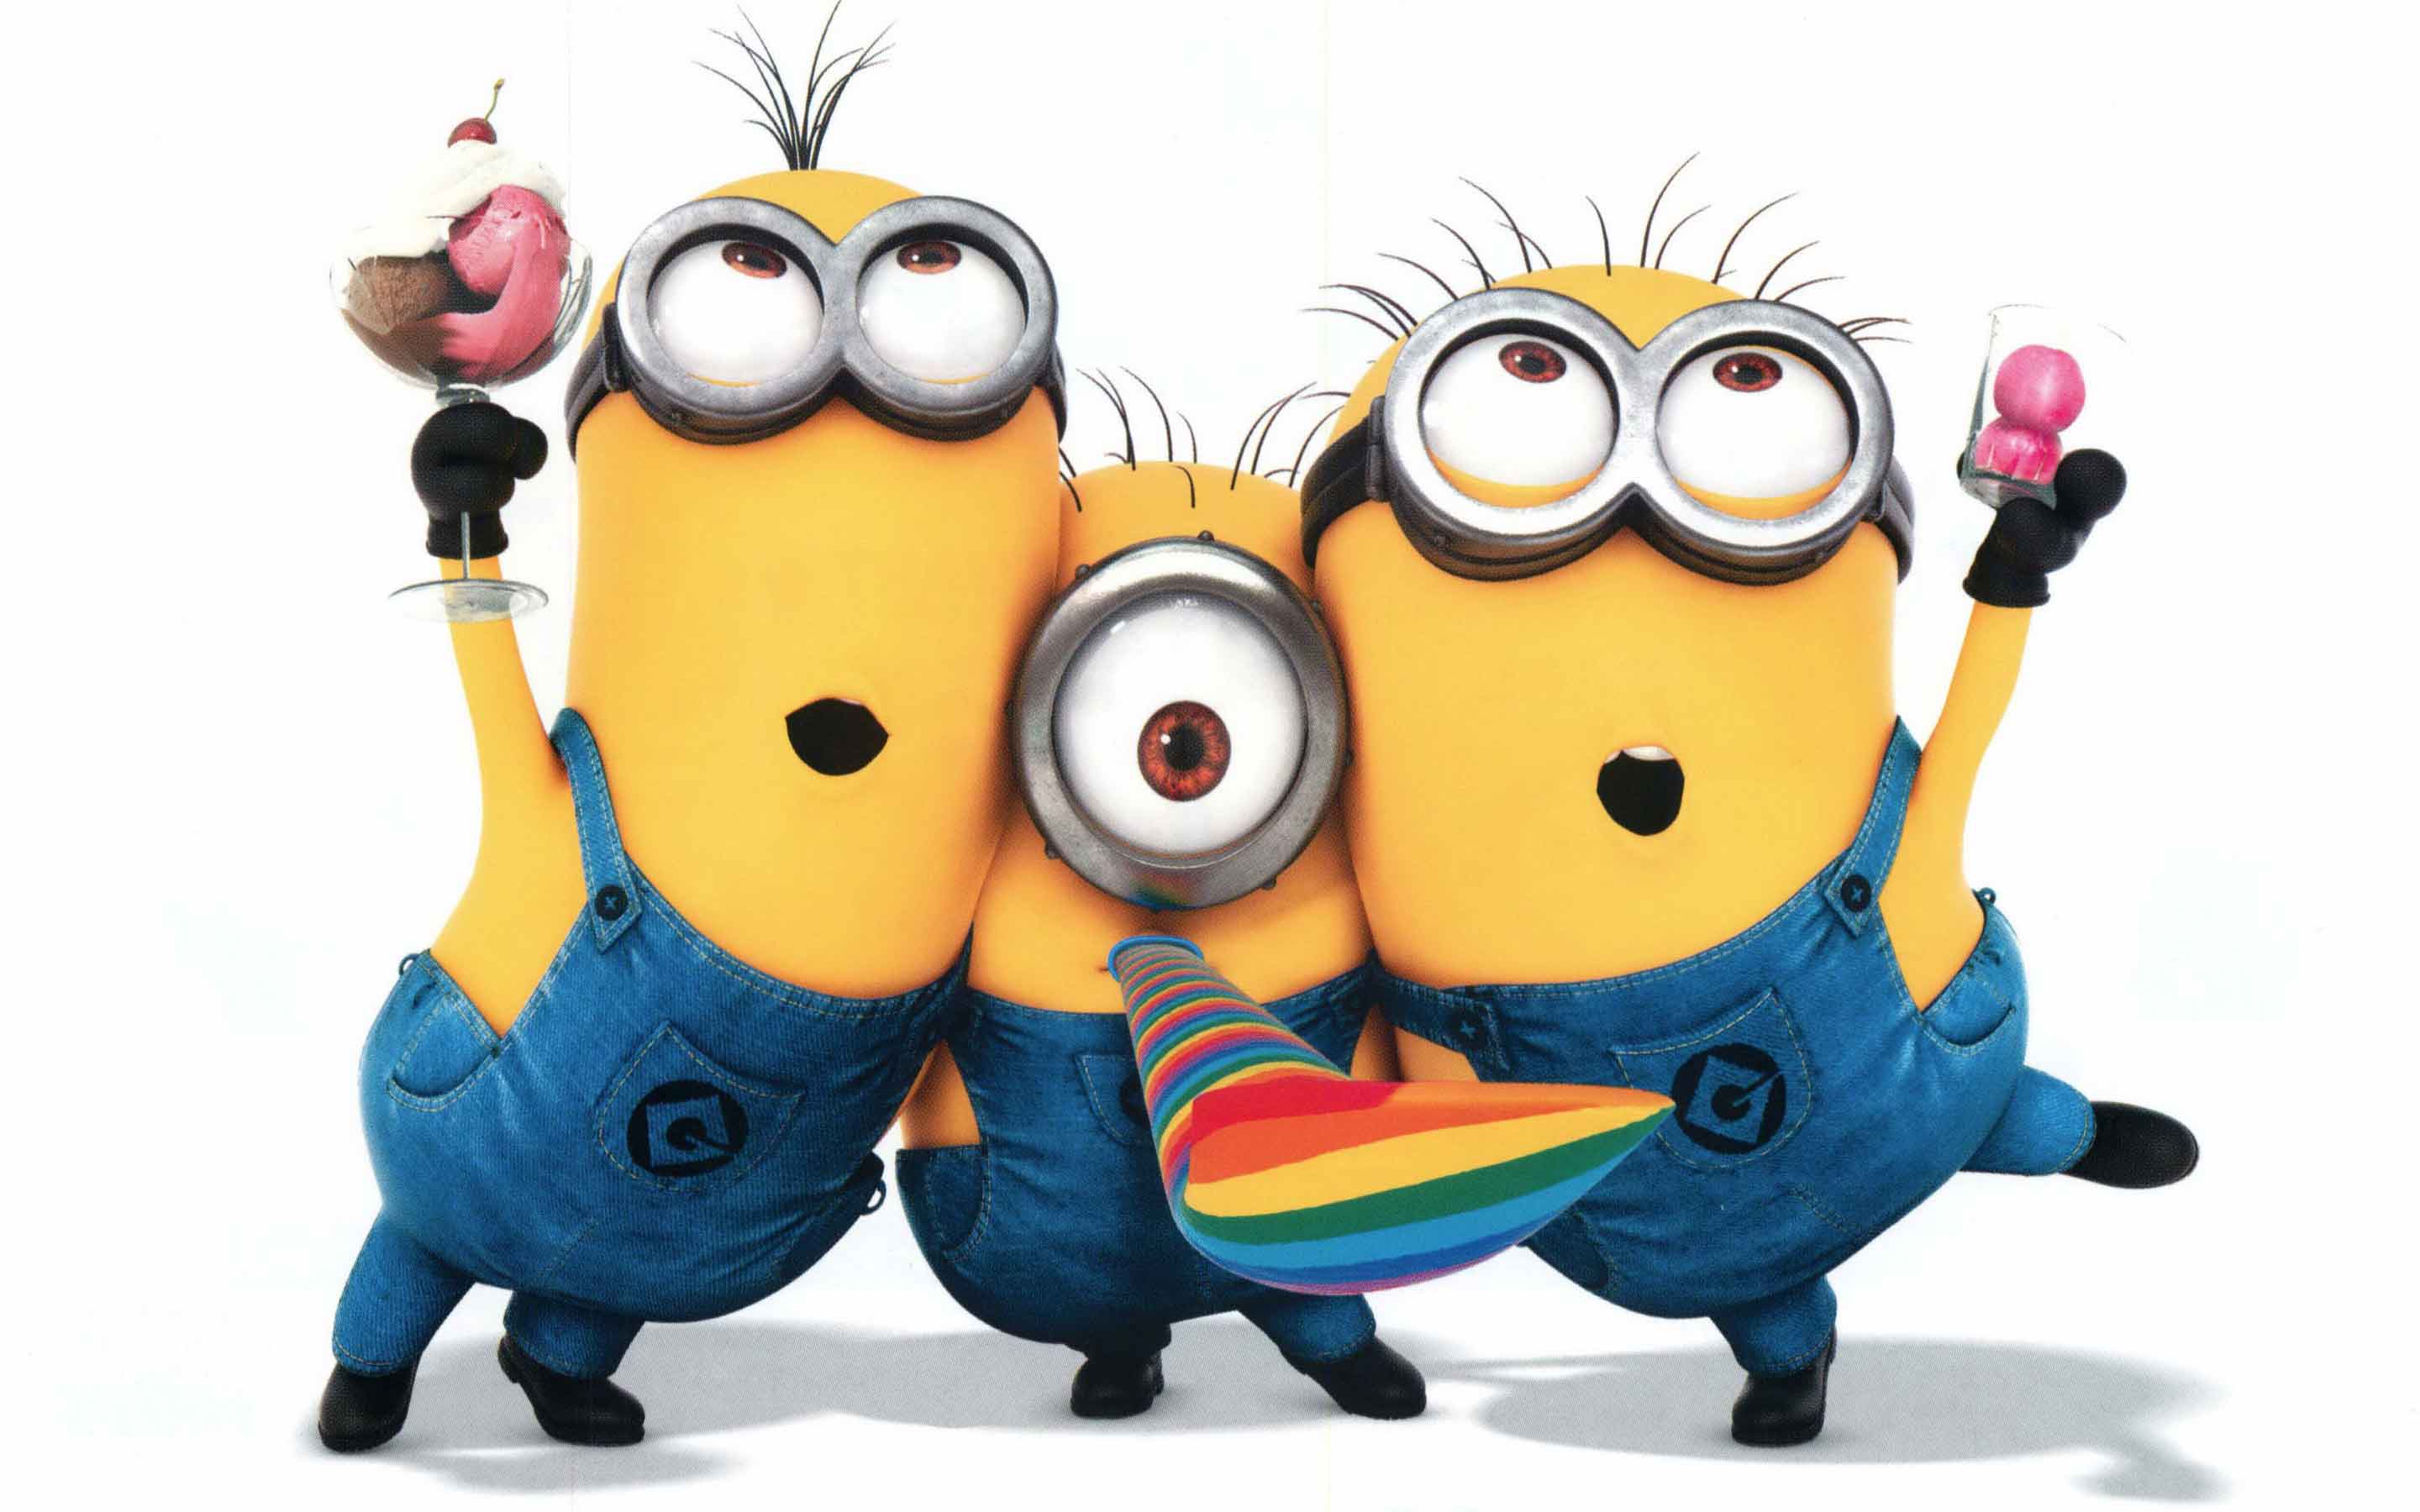 Cute-Minions-Wallpapers-Collection-003.jpg